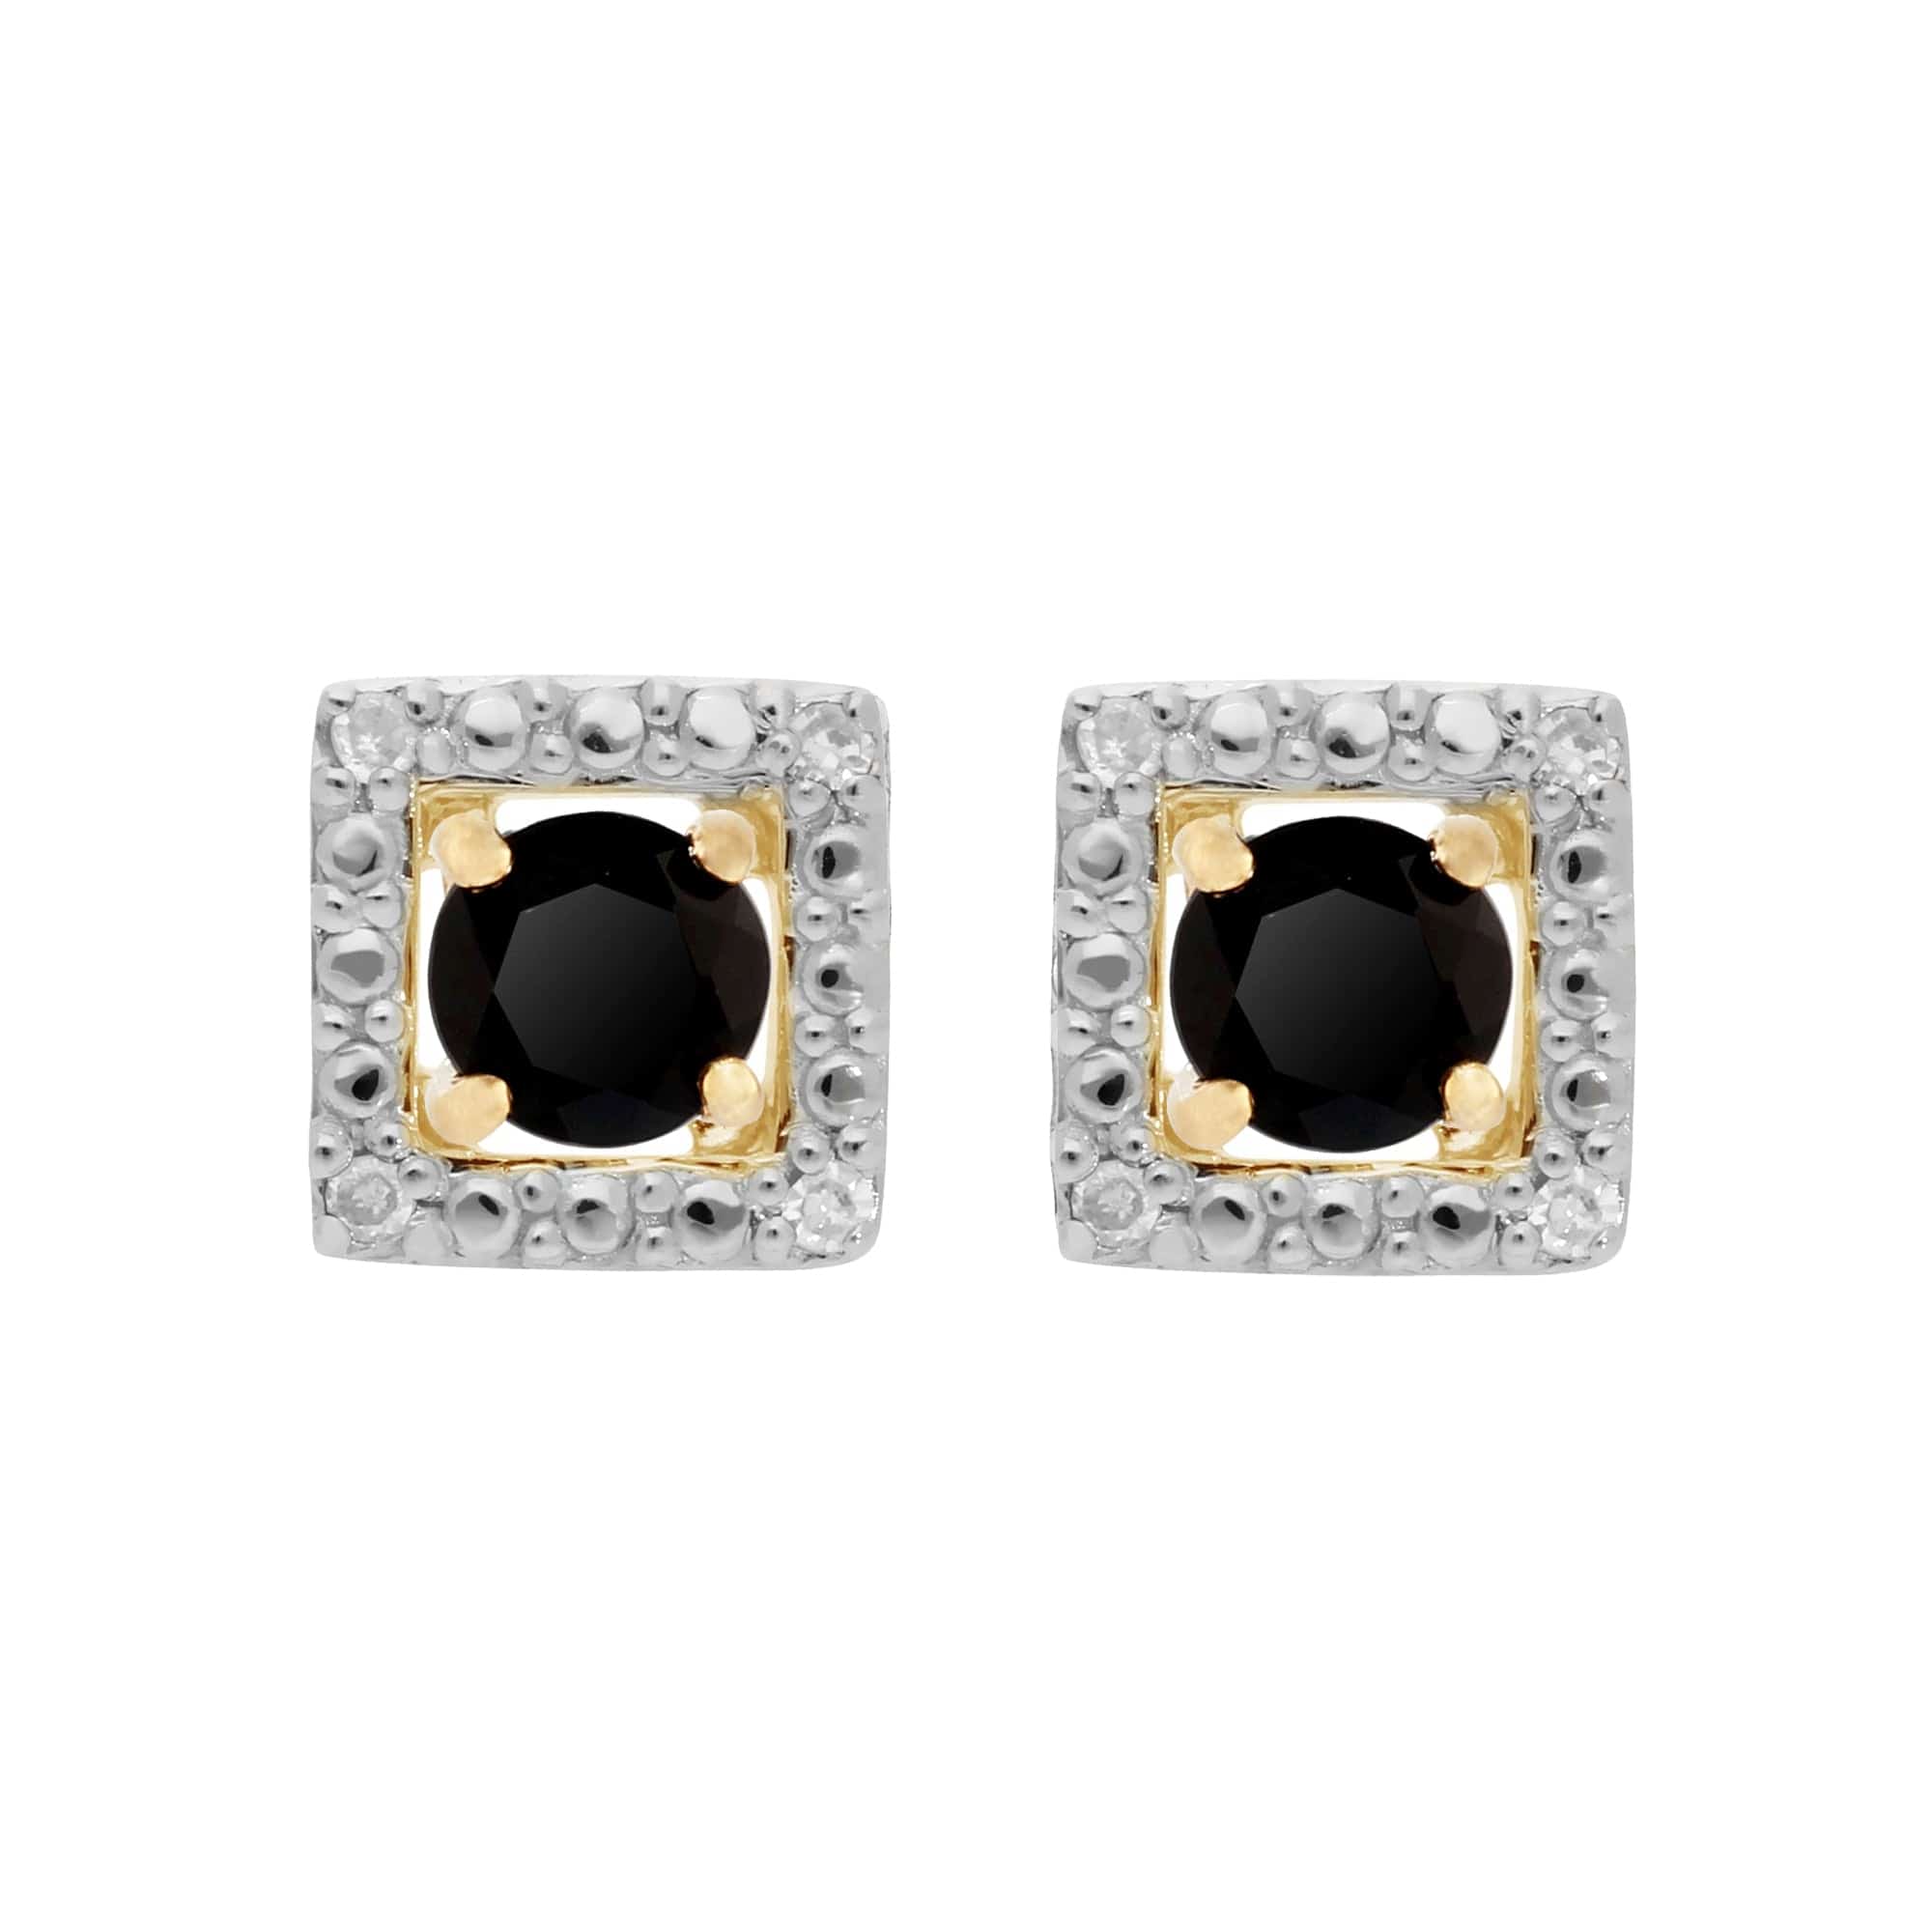 183E0083339-191E0379019 Classic Round Black Onyx Stud Earrings with Detachable Diamond Square Earrings Jacket Set in 9ct Yellow Gold 1